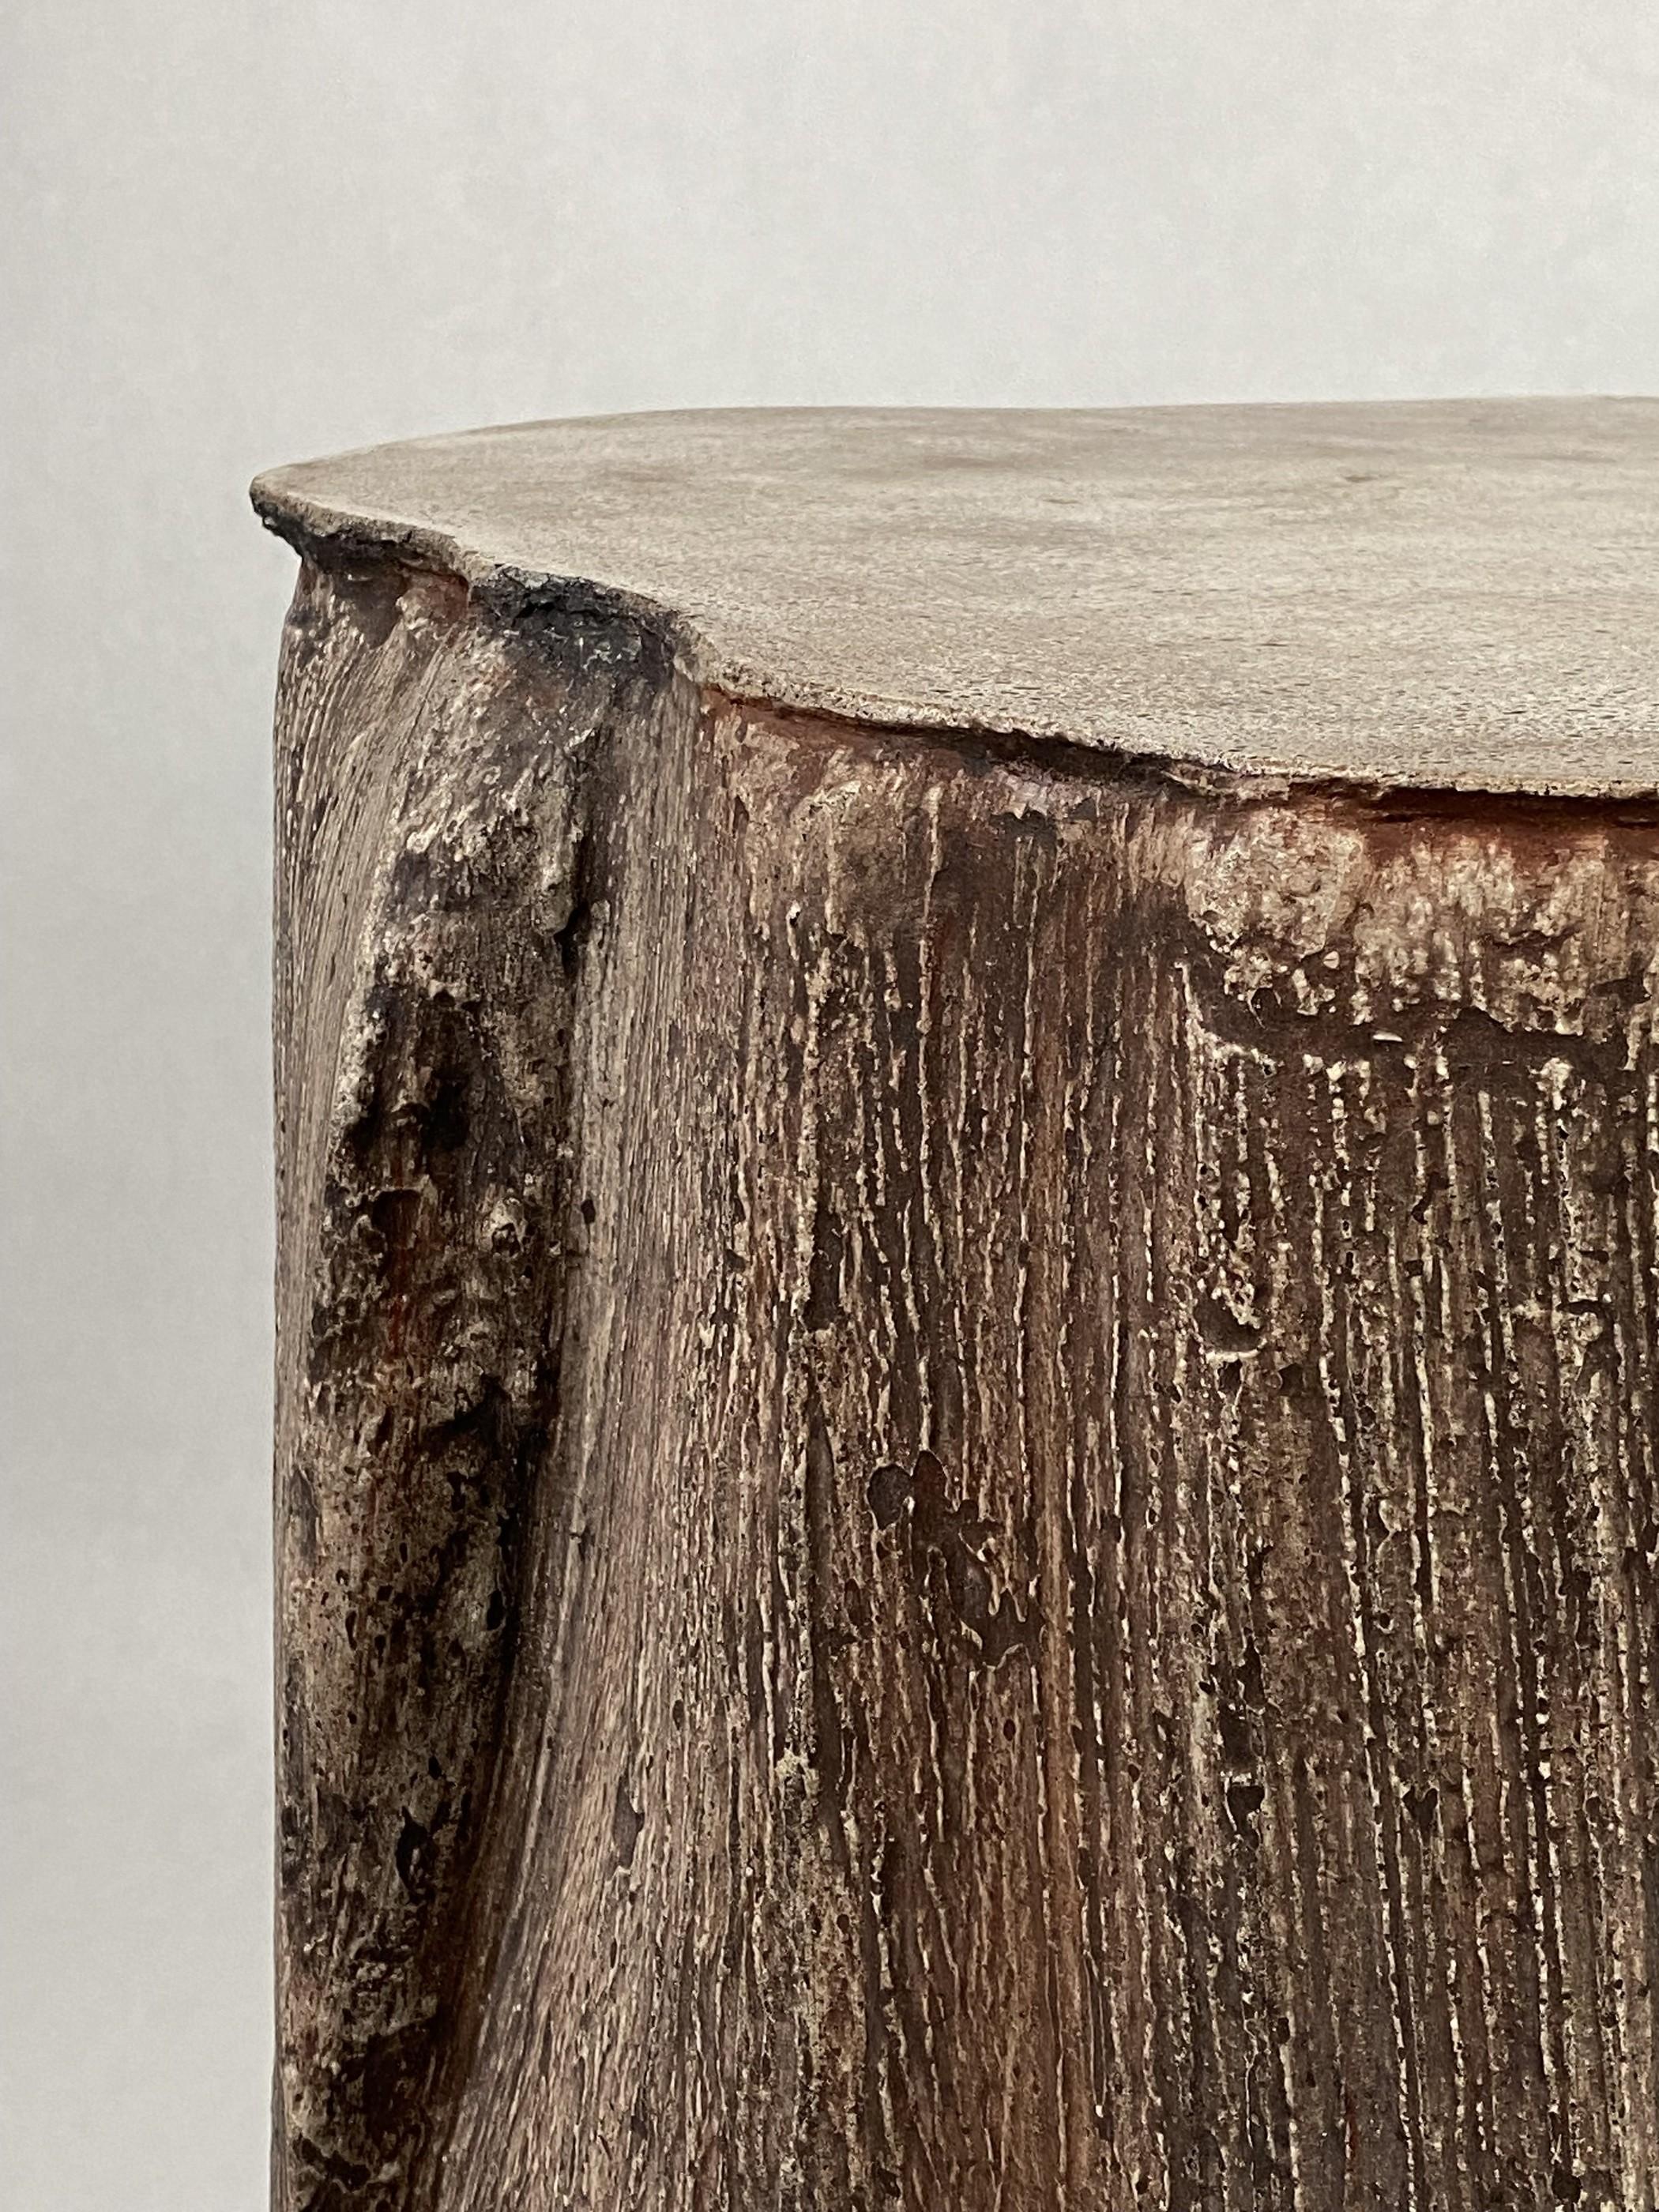 This contemporary, organic concrete Palm table takes its form from stitched-together pieces of palm tree seedpods. Its somewhat faux bois texture, prominent but not rough, calls out for a dance of the fingers, with crevices a climber would dream of.